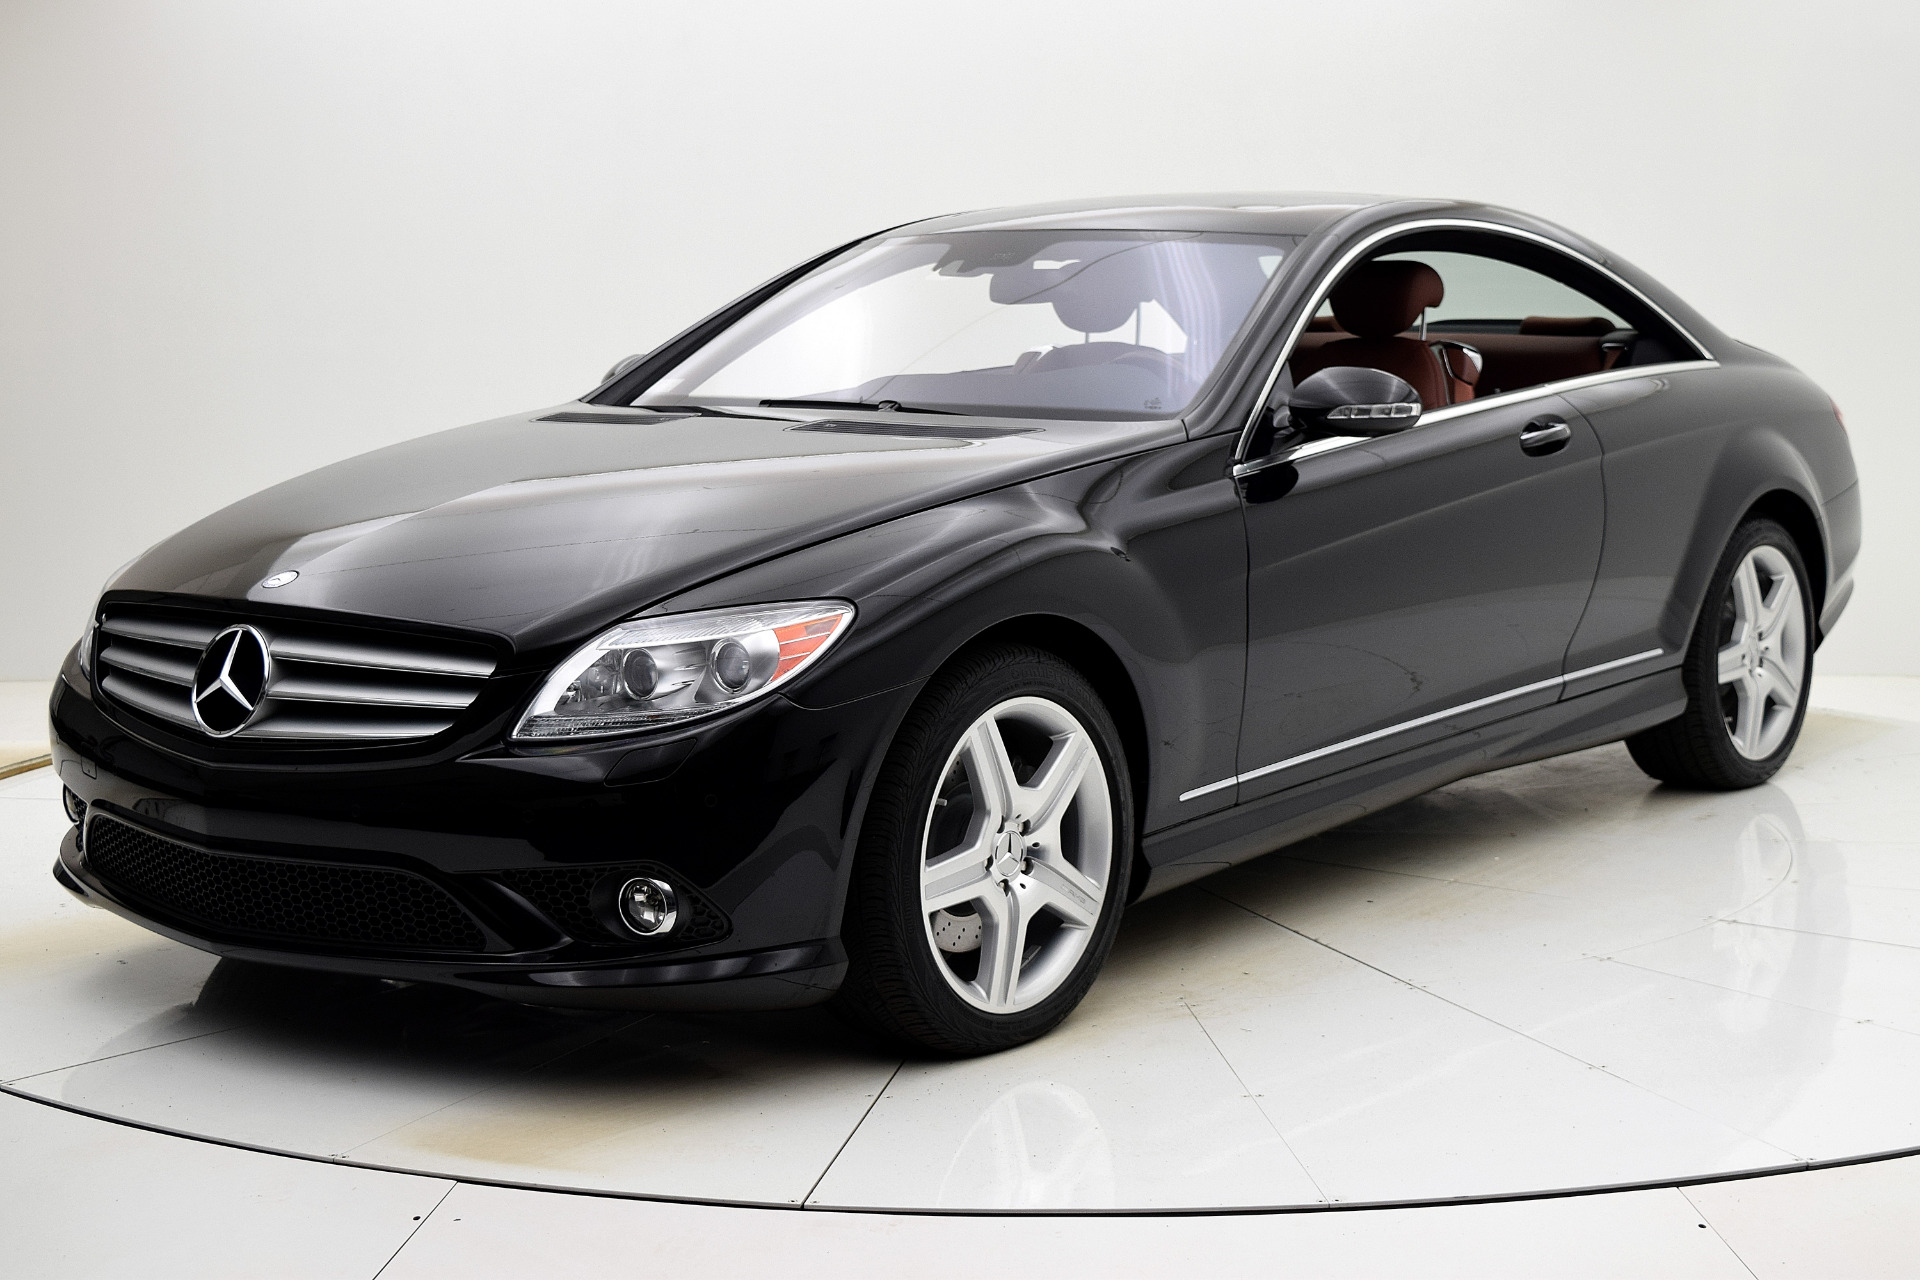 Used 2009 Mercedes-Benz CL-Class 5.5L V8 for sale Sold at F.C. Kerbeck Aston Martin in Palmyra NJ 08065 2